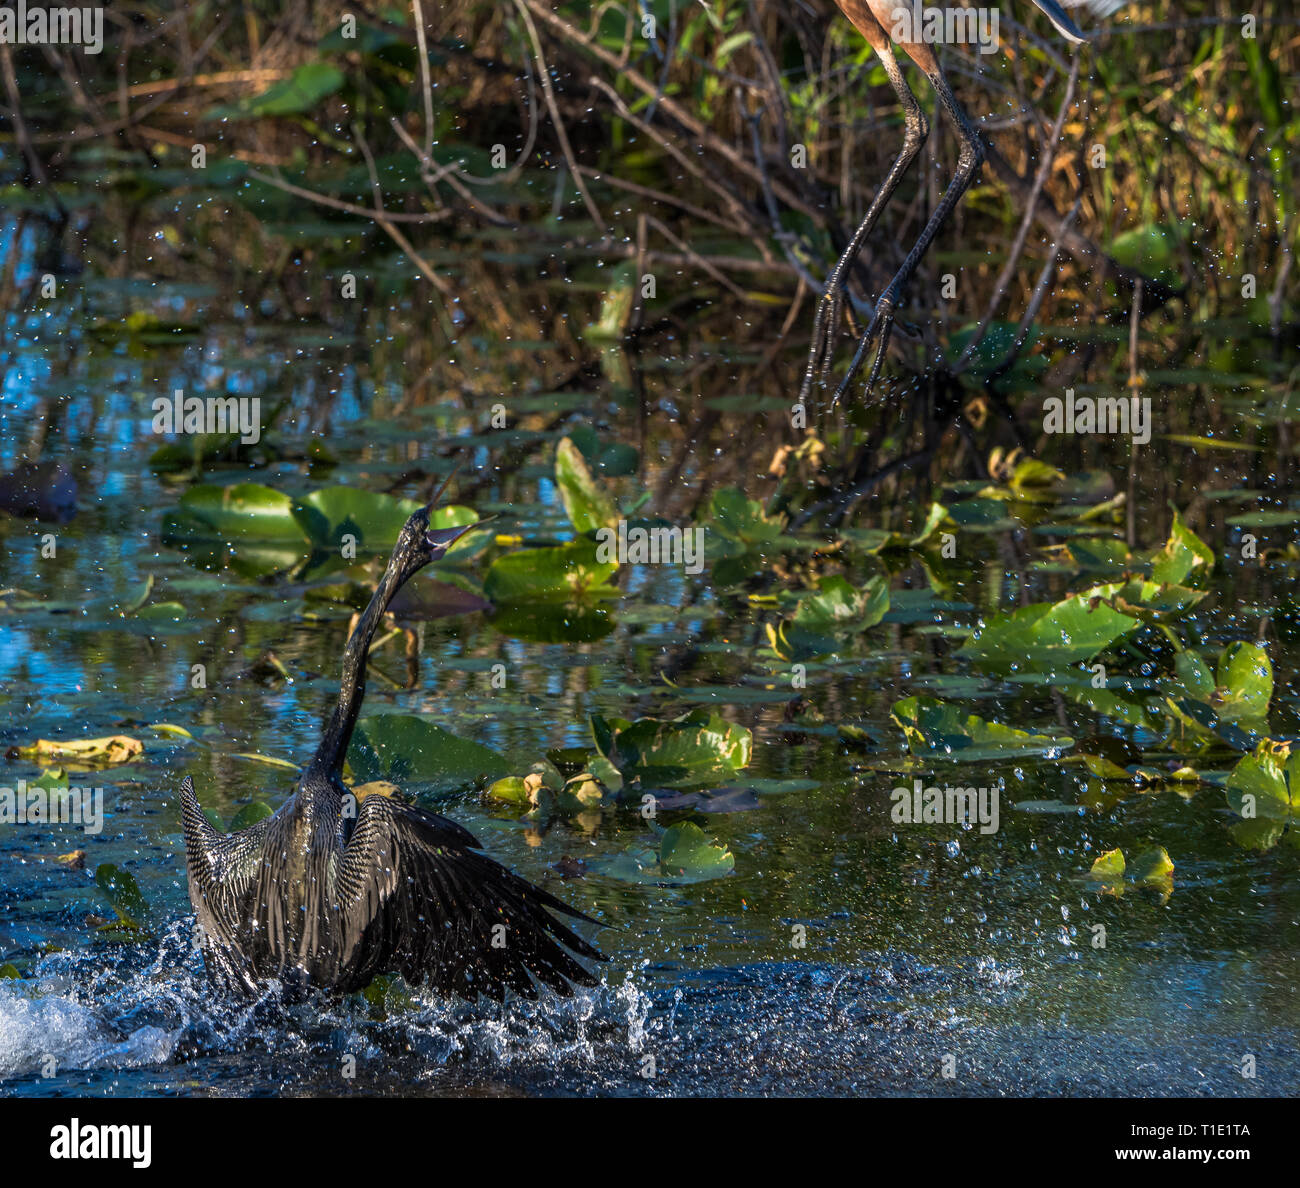 Multi-part action sequence images of an Anhinga launching itself out of the water to attack a great blue heron, in the Florida Everglades. Stock Photo